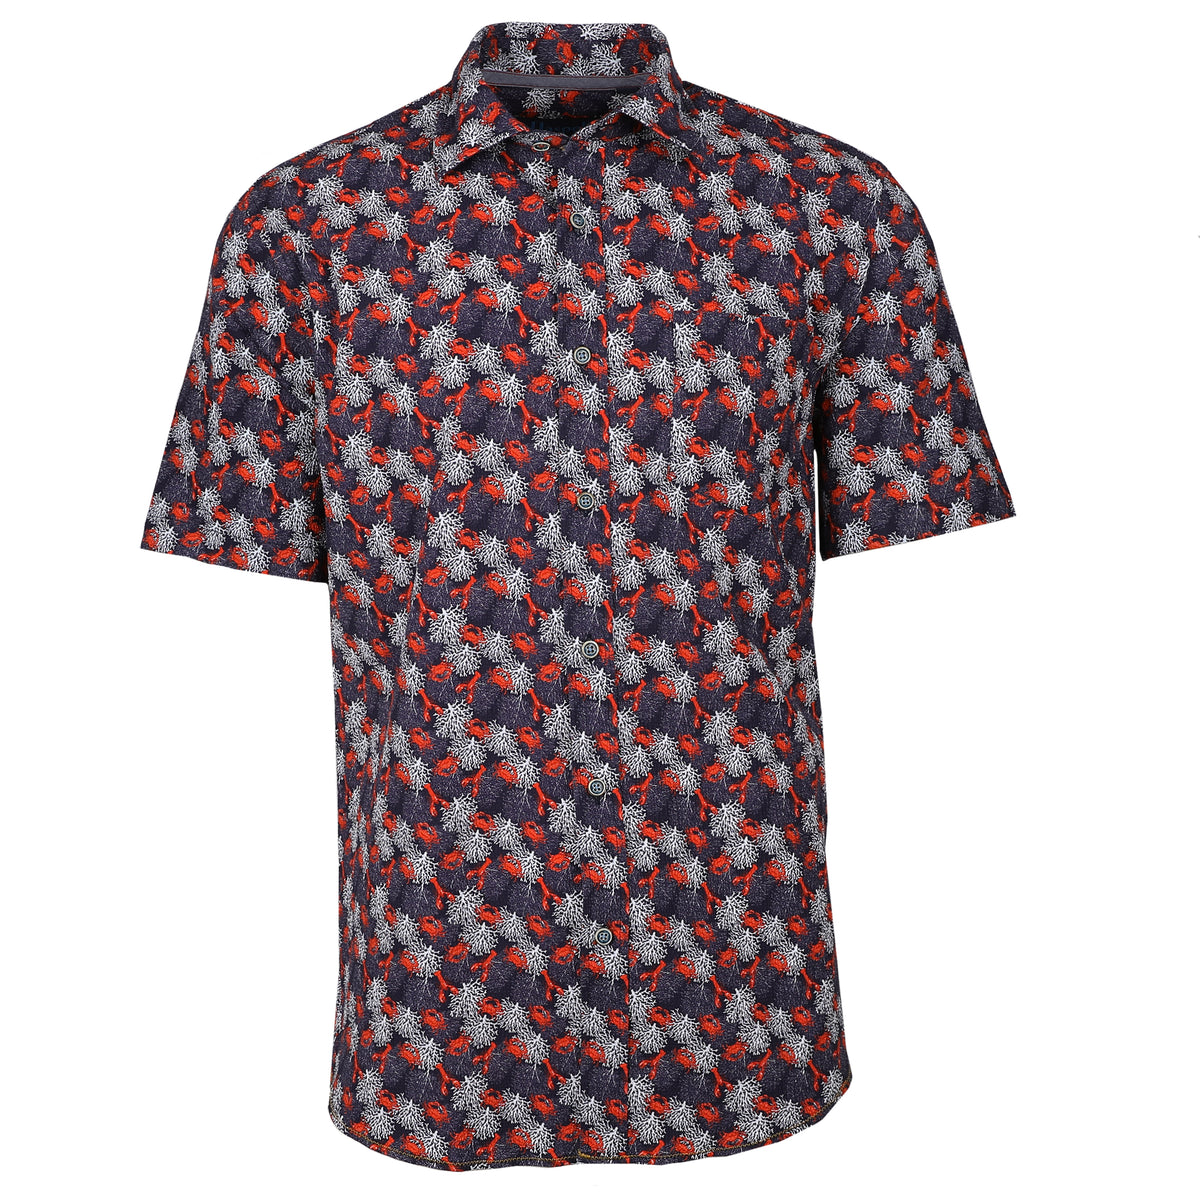 Make a fashion statement at all your crustacean inspired good times. That classic seersucker pucker will keep you cool while your shindig heats up. Prepare to be noticed with this bold and striking style.  100% Cotton Seersucker • Short Sleeve • Spread Collar • No Chest Pocket • Machine Wash • Made in Italy 